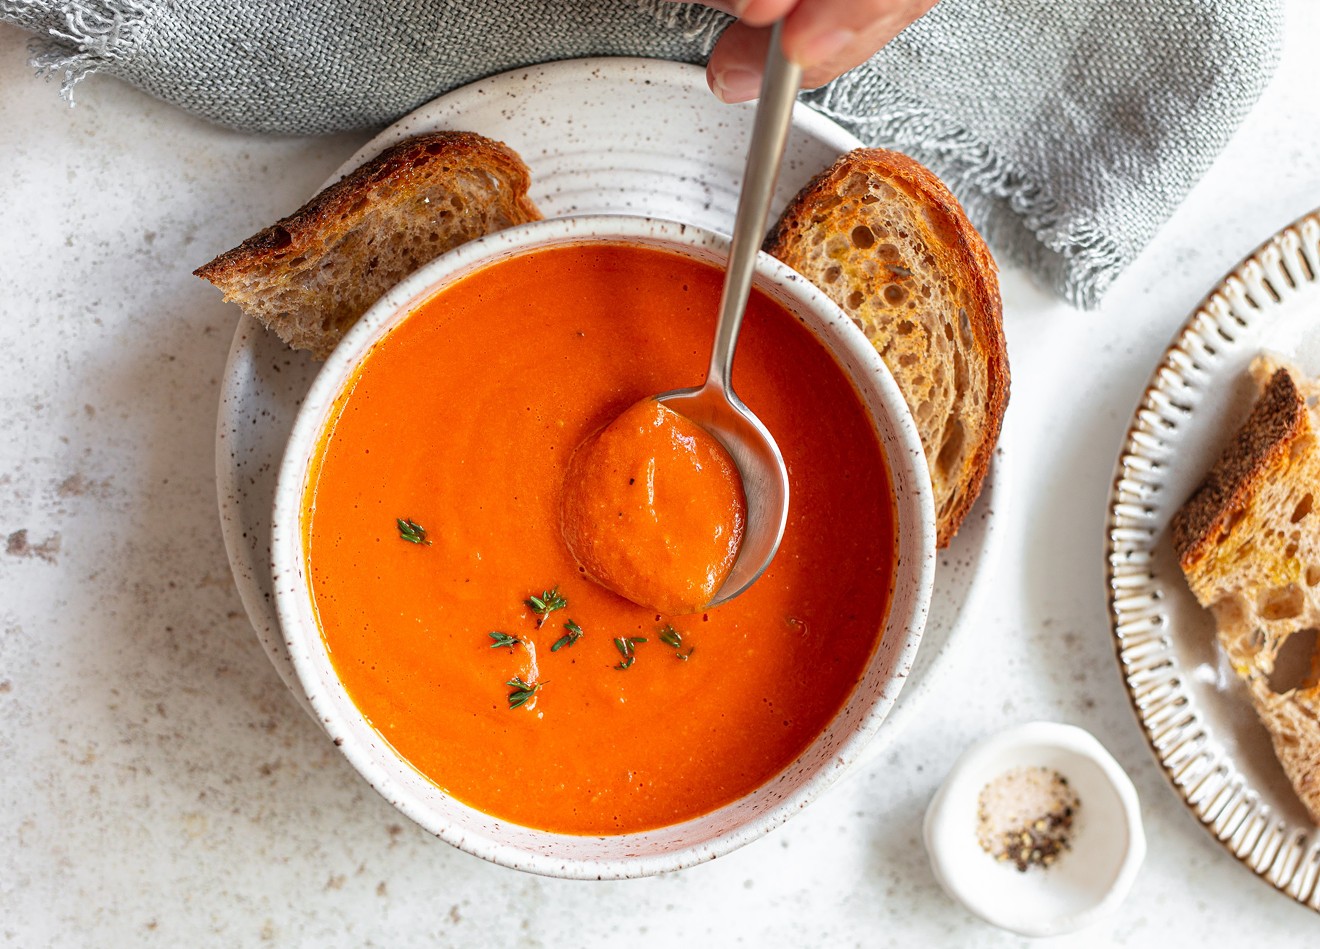 The roasted tomato soup is thickened with crusty bread instead of dairy.